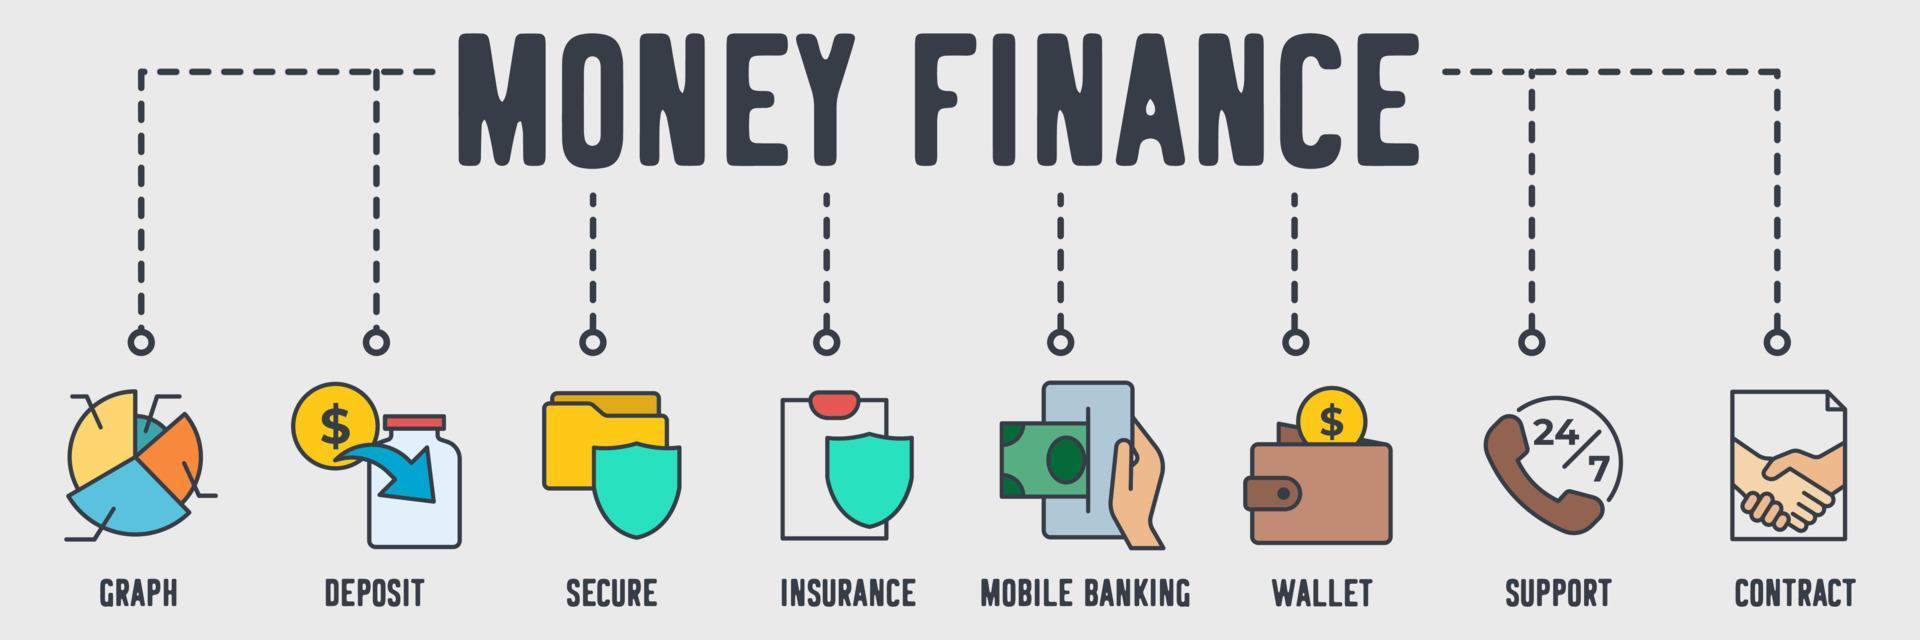 Money Business Finance banner web icon. graph, deposit, secure, insurance, mobile banking, wallet, support, contract vector illustration concept.